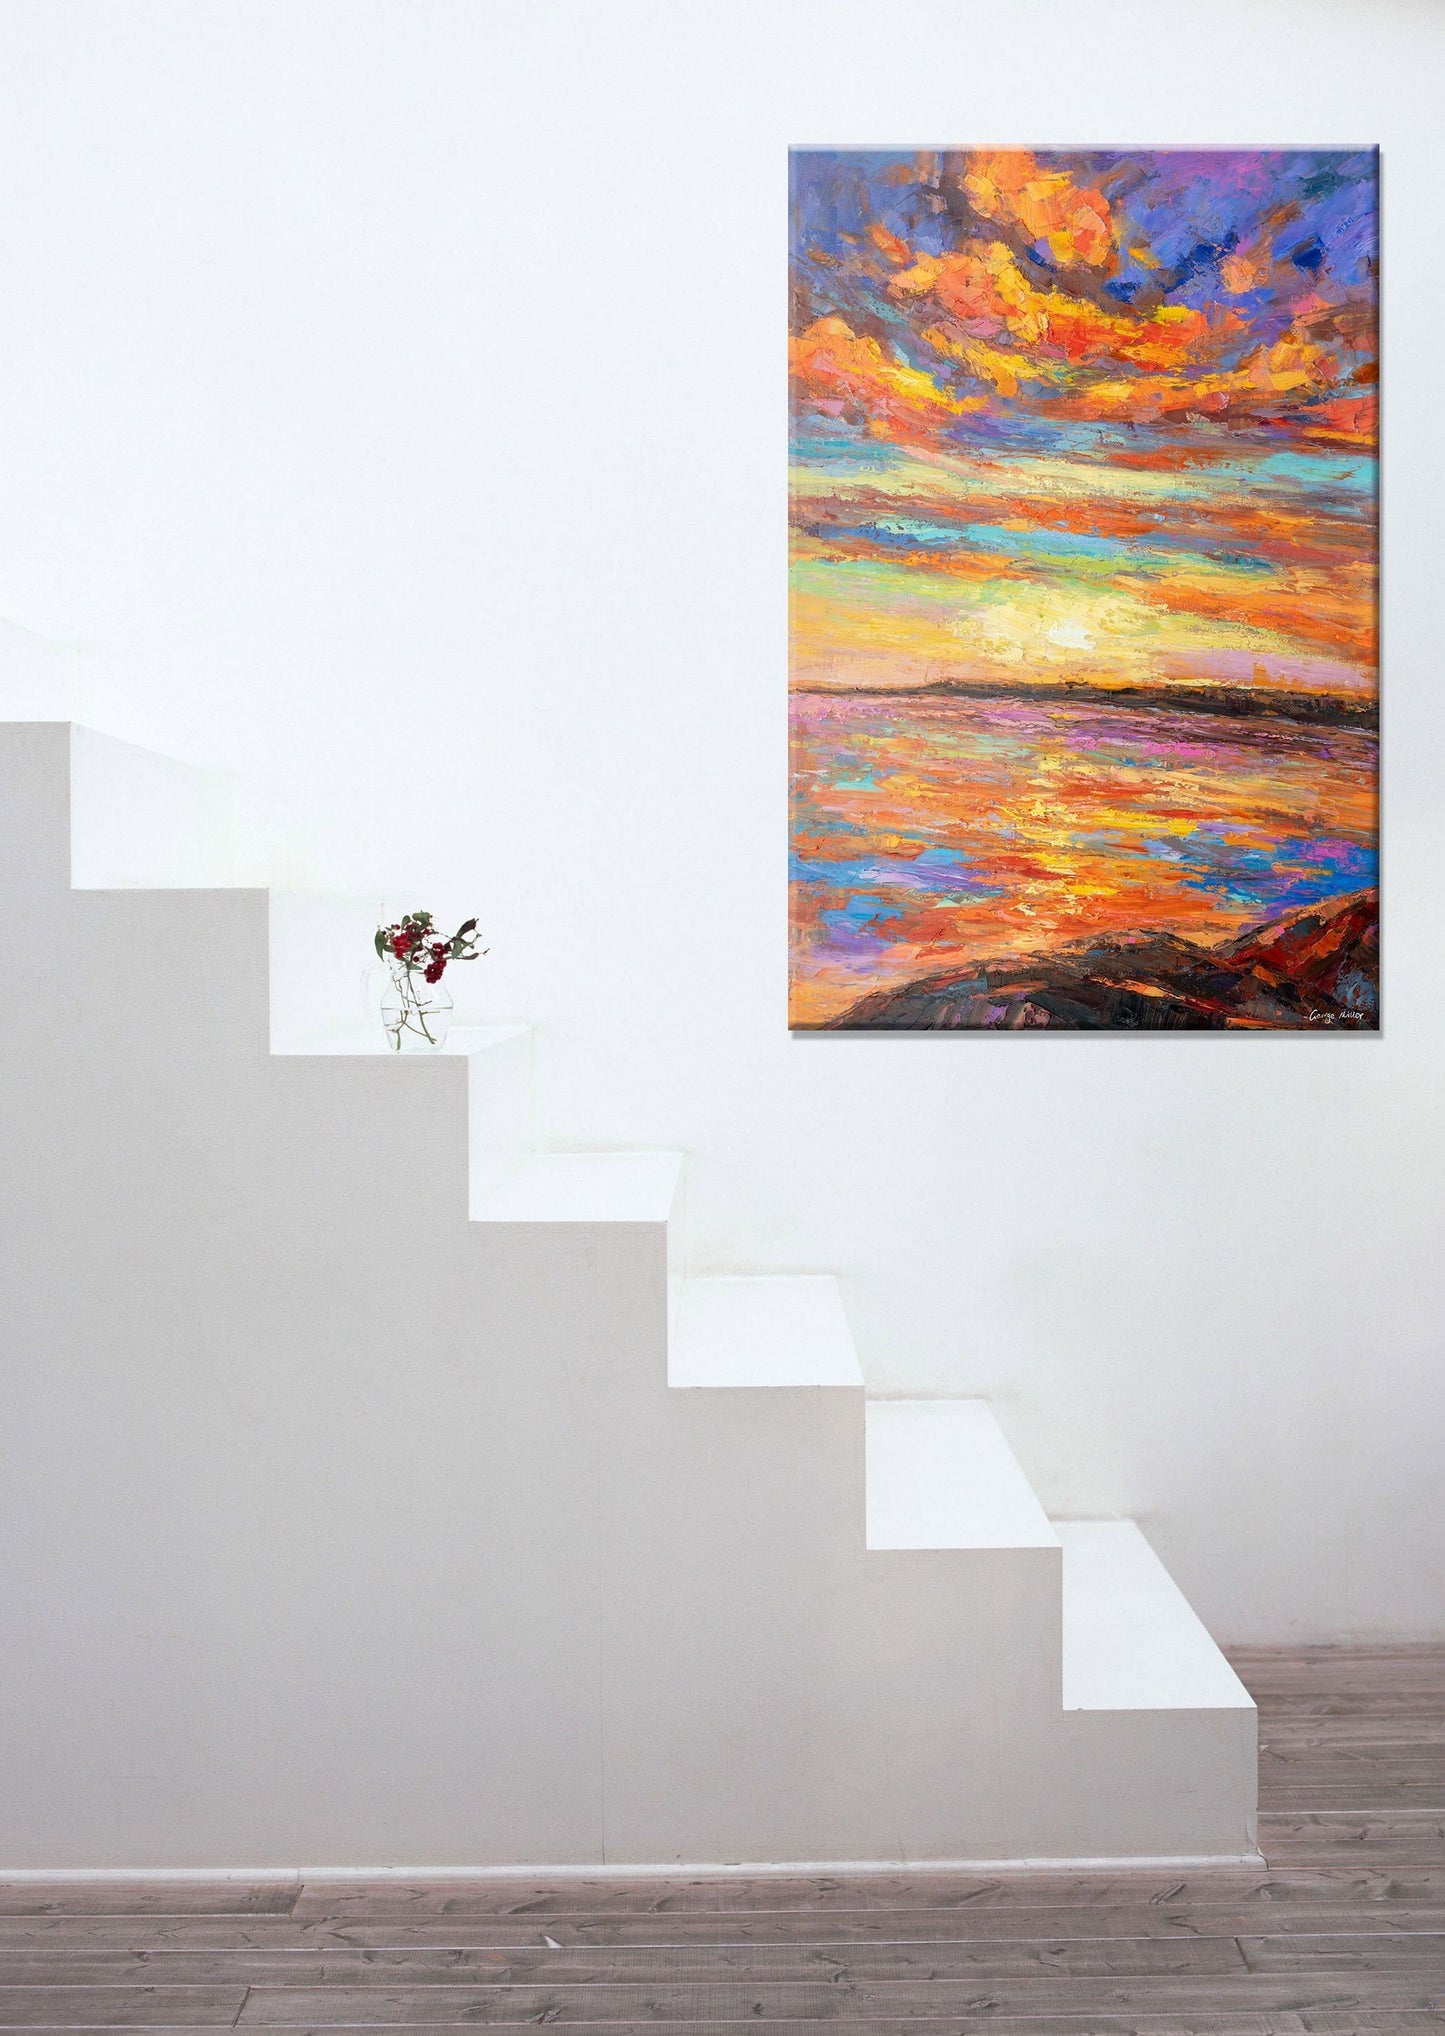 Seascape Sunset Oil Painting, Extra Large Wall Art Abstract, Landscape Painting, Wall Art, Landscape, Extra Large Wall Art Beach